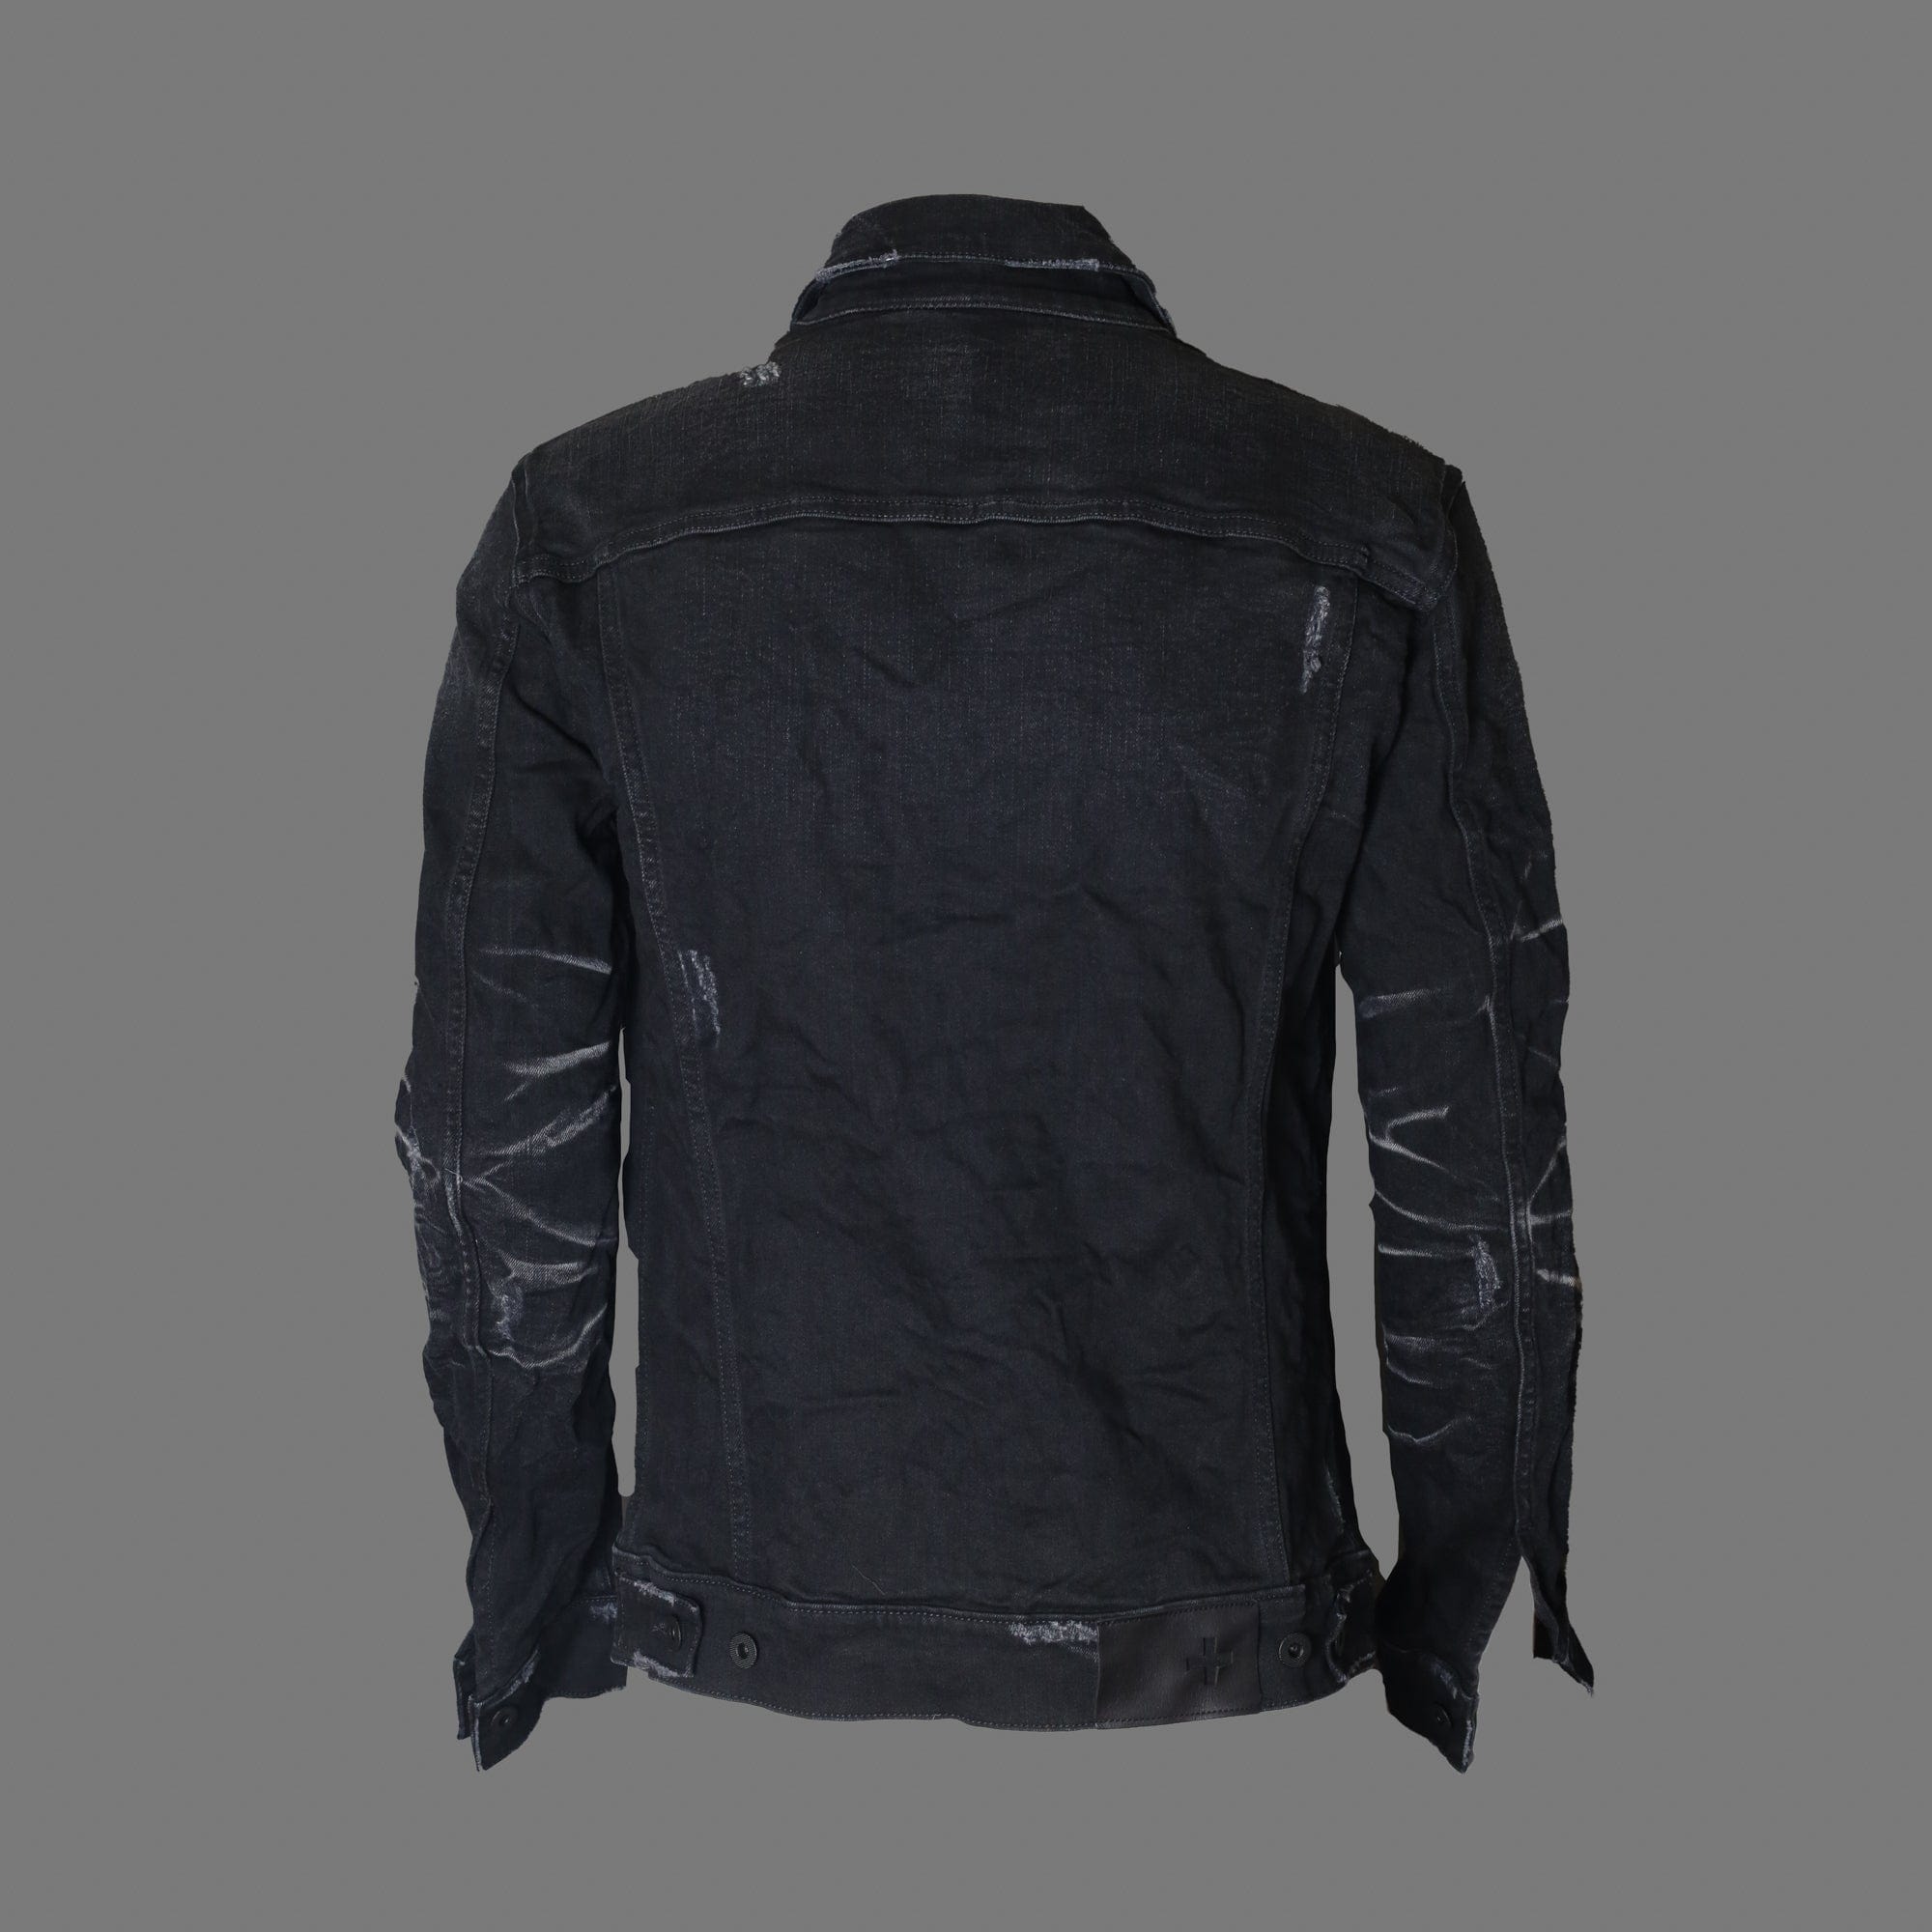 Not specified Jacket MD75 9283 Black